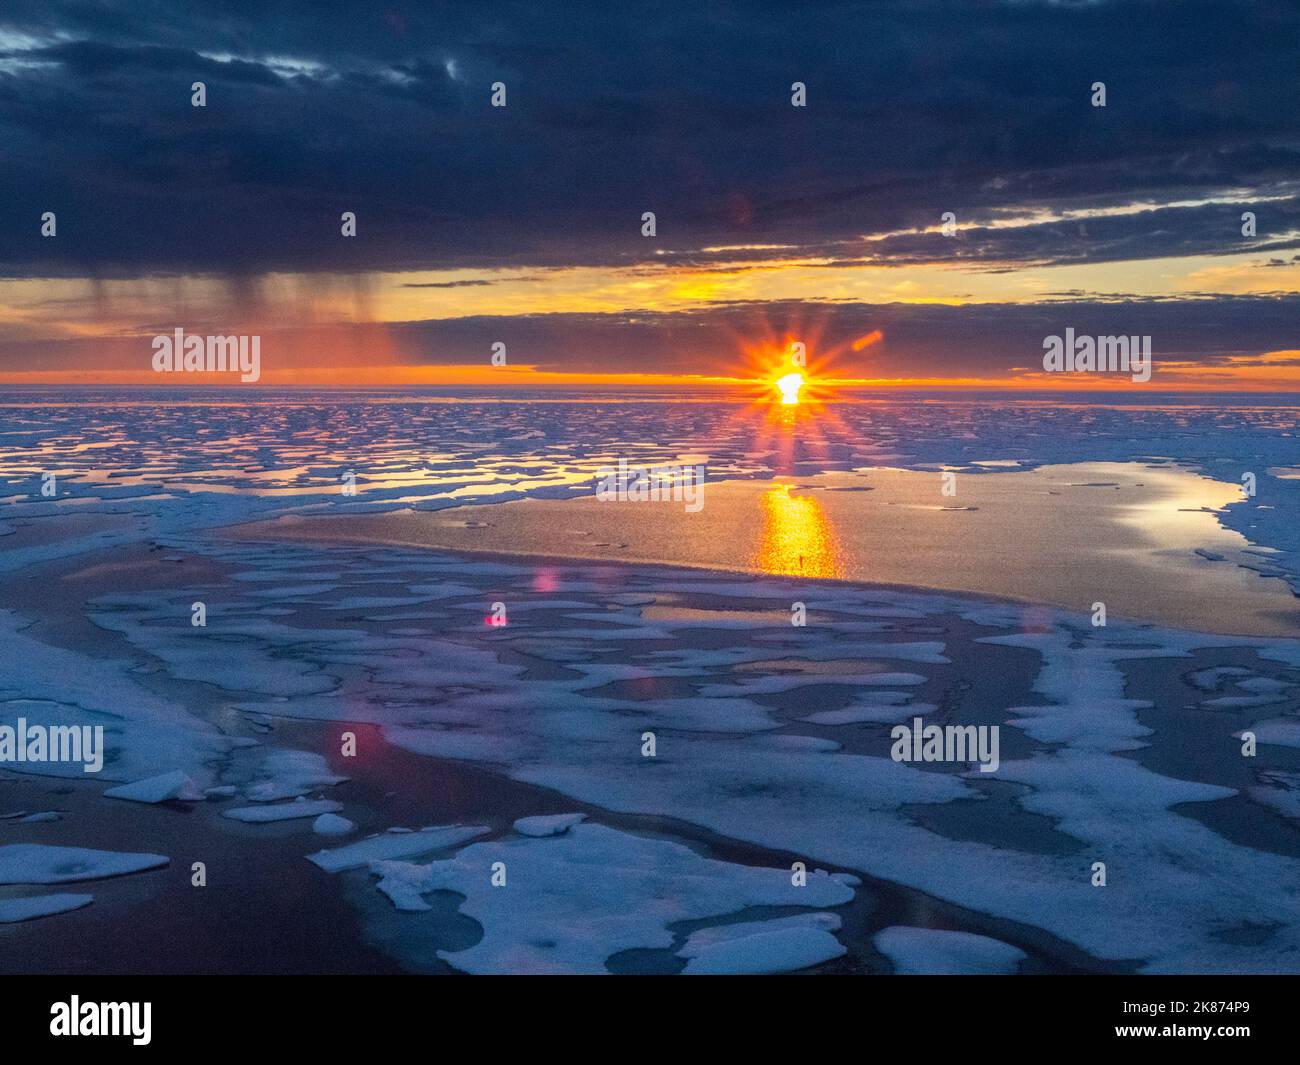 Sunset and rain showers in the heavy pack ice in McClintock Channel, Northwest Passage, Nunavut, Canada, North America Stock Photo